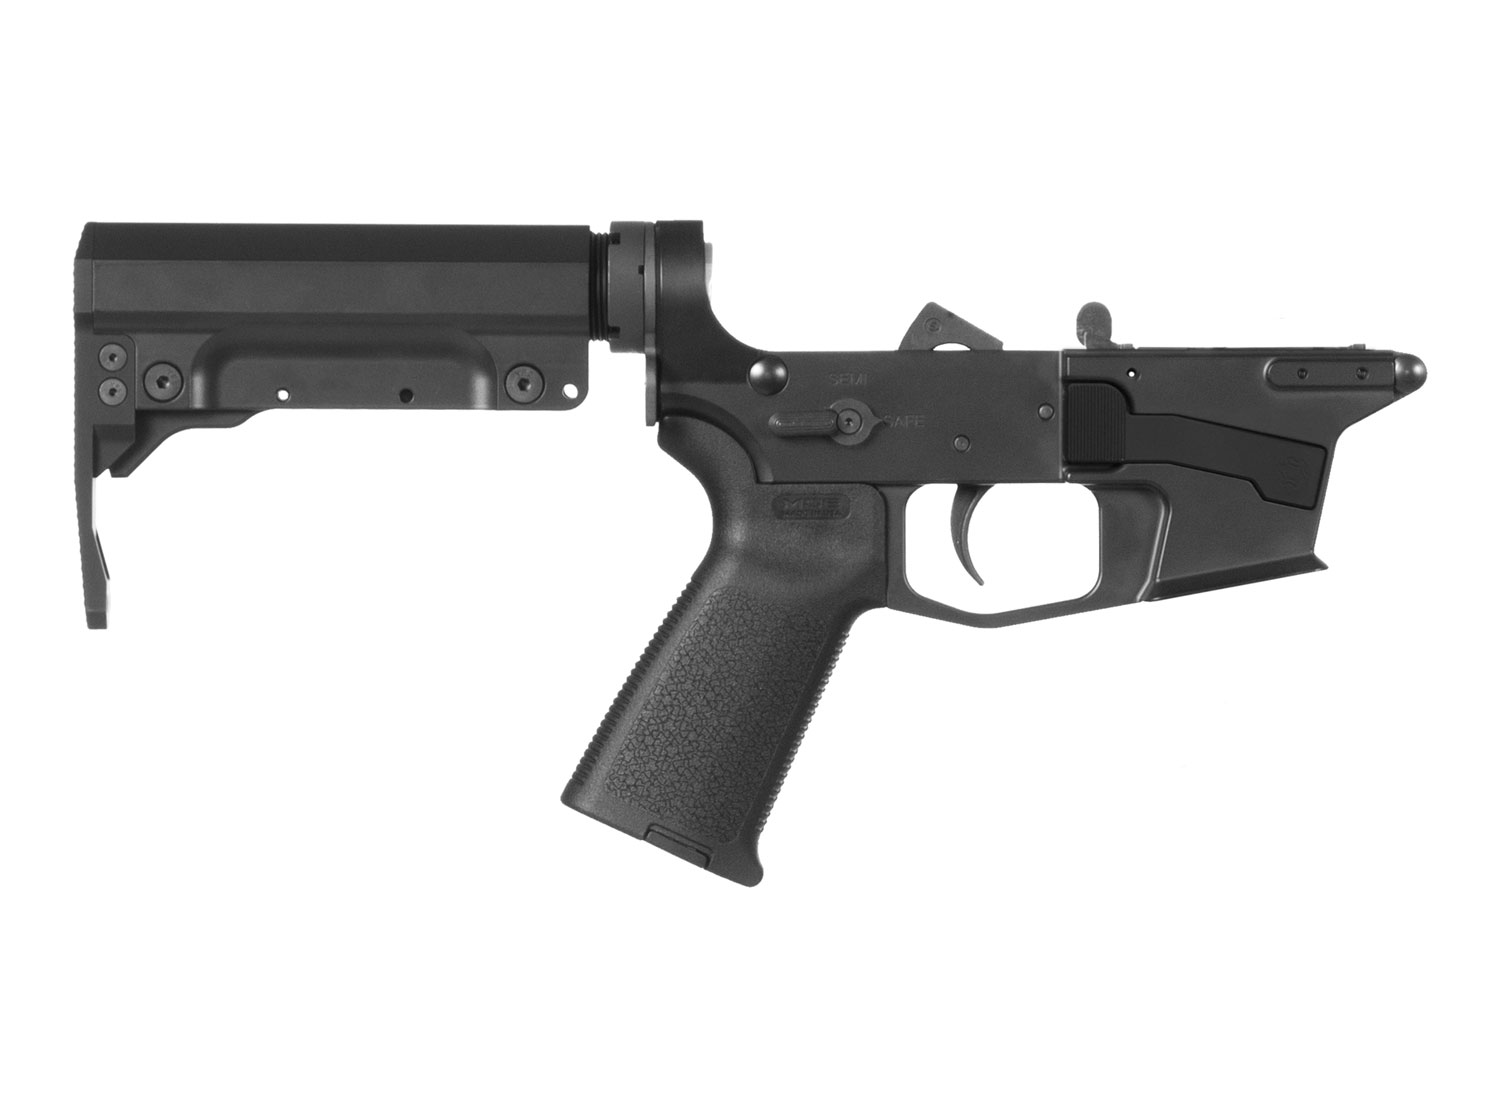 CMMG 92CA3C7 Lower Group  9mm Luger 7075-T6 Aluminum Black Anodized, Black Synthetic CMMG 6 Position RipStock & Magpul MOE Pistol Grip for CMMG Banshee 300 MK17